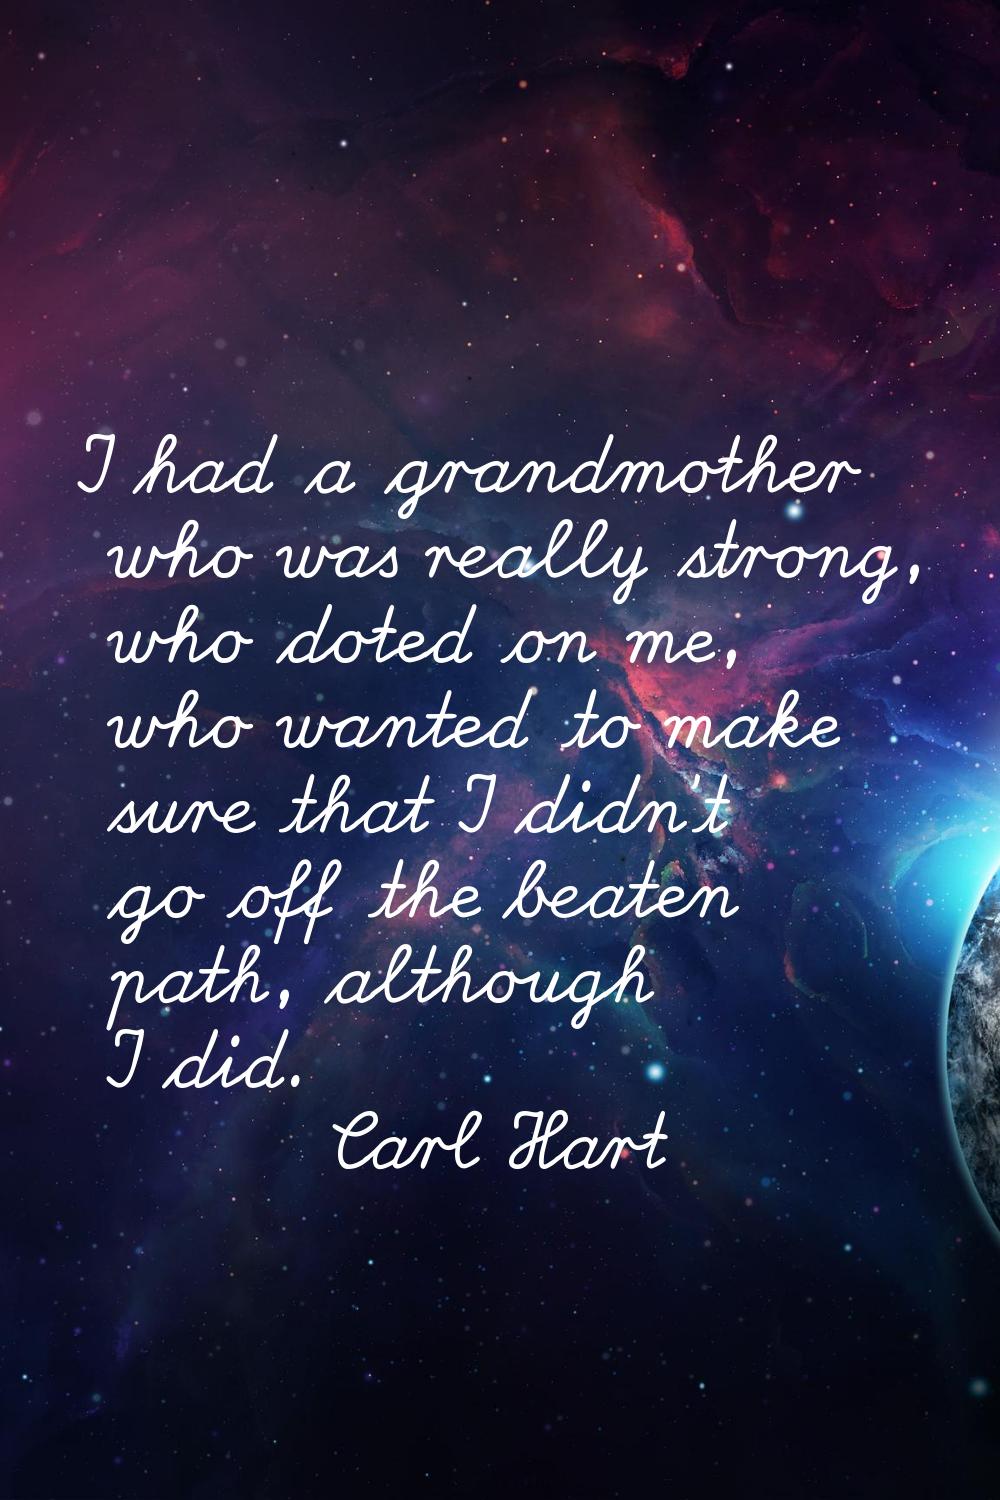 I had a grandmother who was really strong, who doted on me, who wanted to make sure that I didn't g